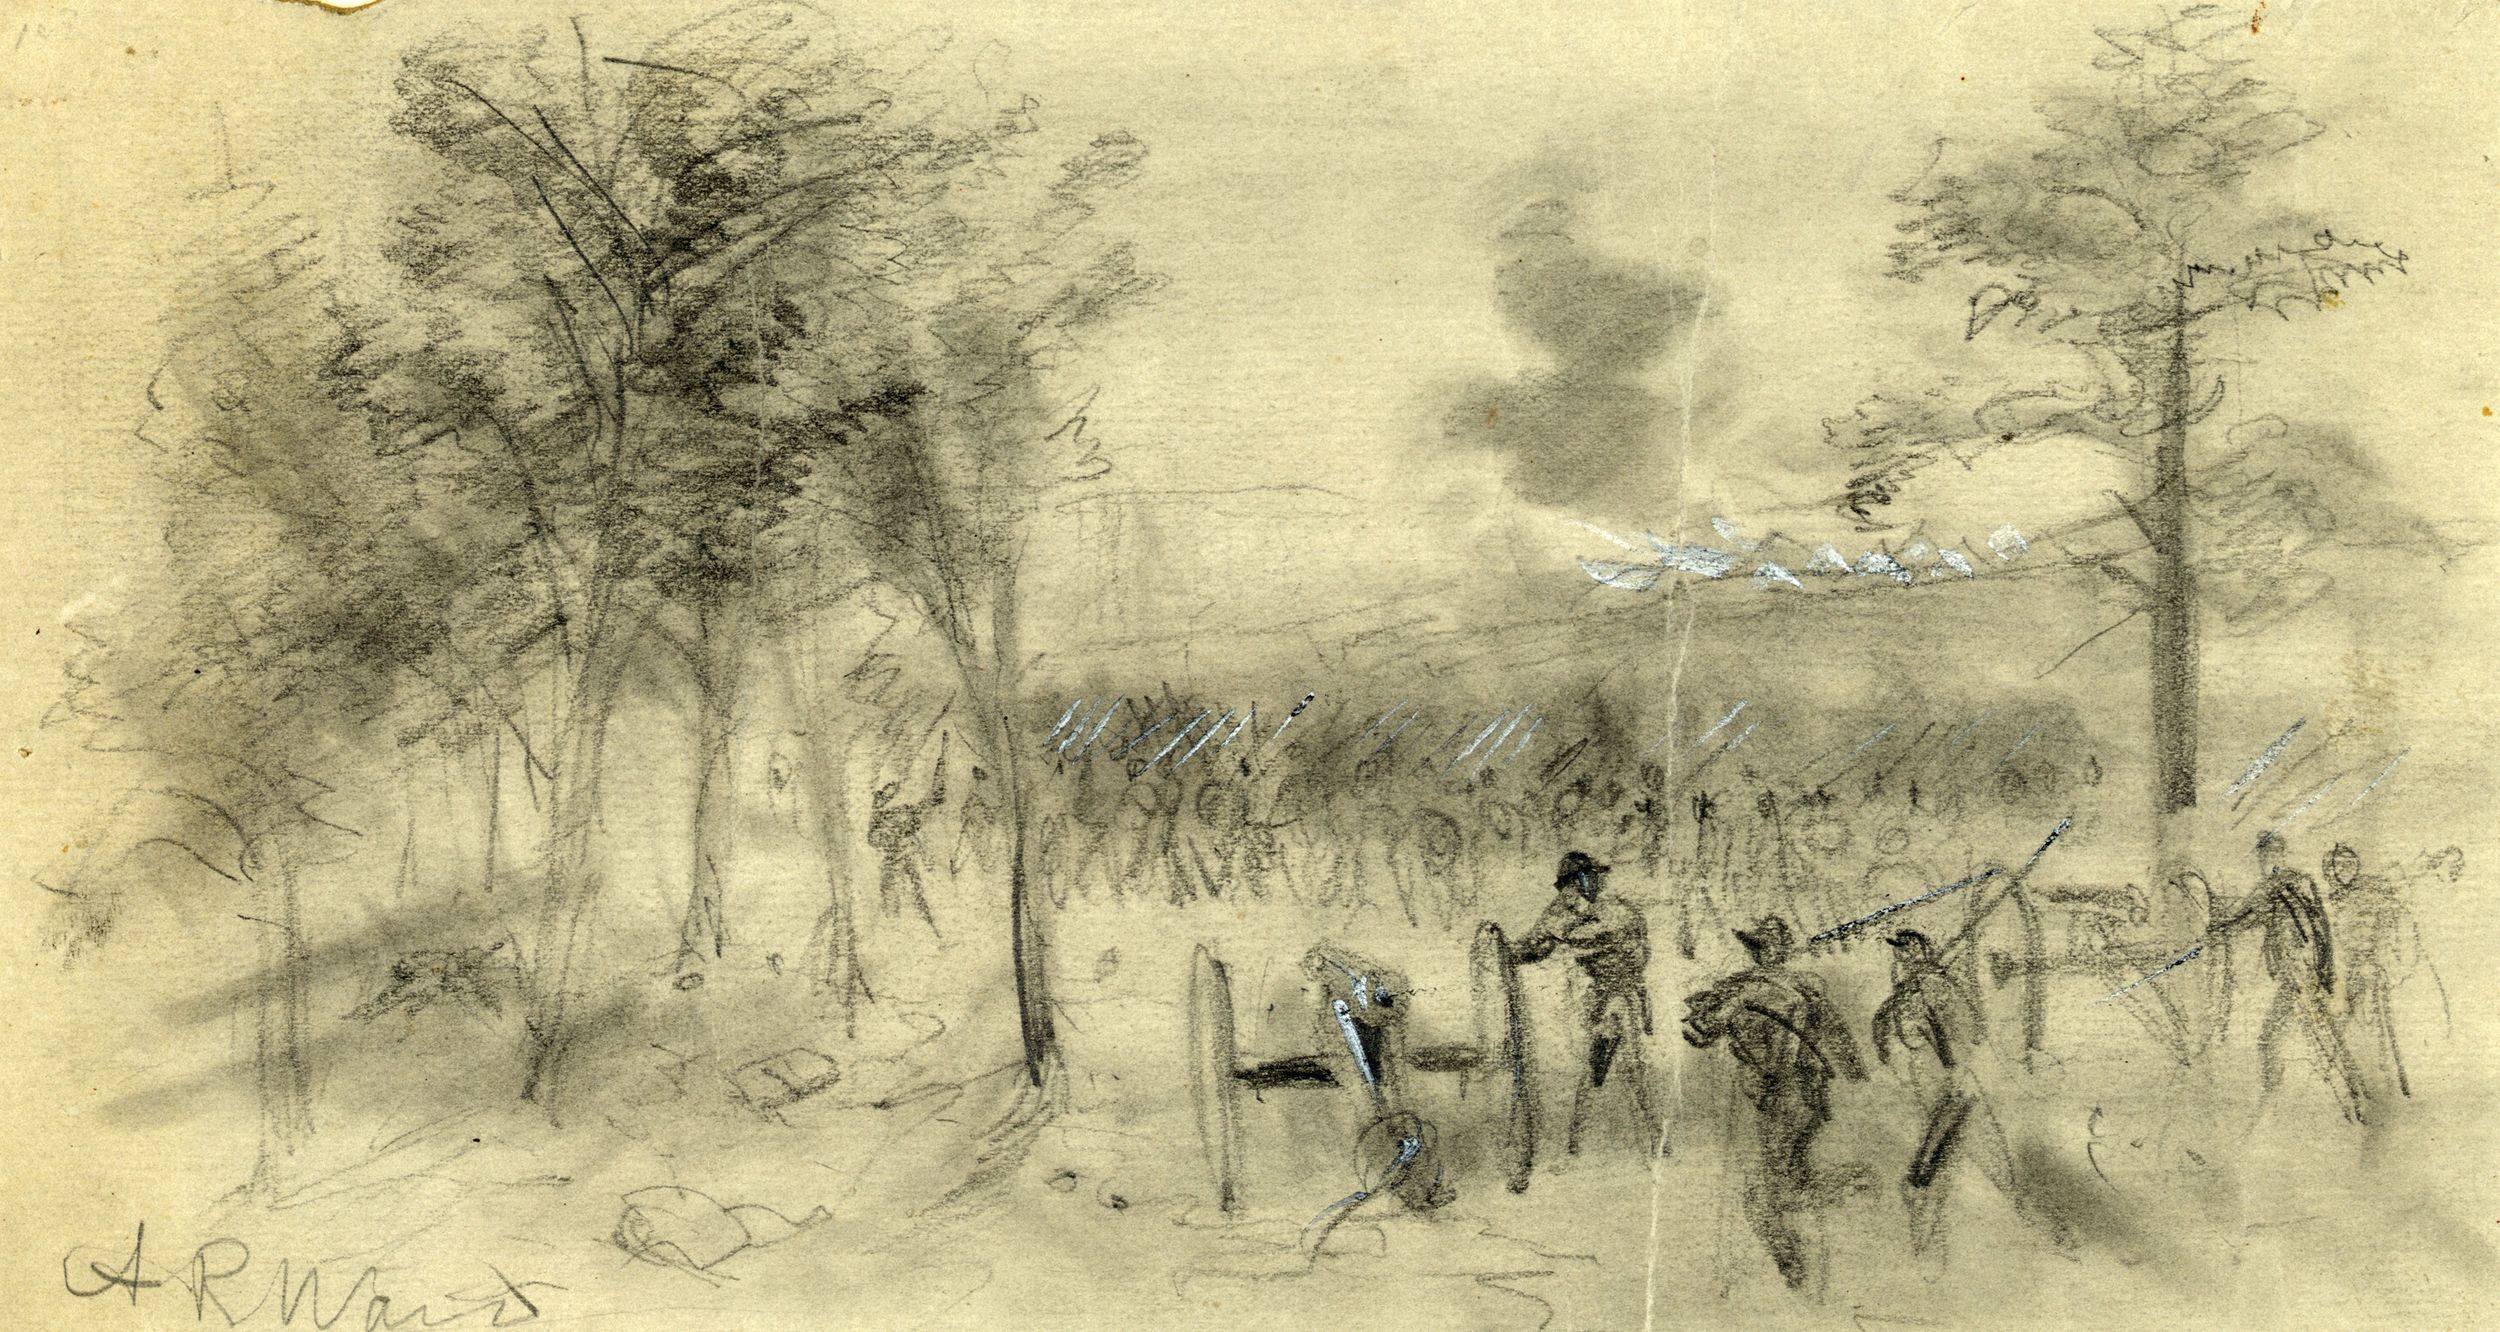 “Cedar Creek, Virginia,” drawing by Alfred Rudolph Waud, October 19, 1864. Waud immigrated to the U.S. from London, and found work as a newspaper artist. He was assigned to cover the Federal Army of the Potomac and was present at every battle that unit fought in, from the First Battle of Bull Run to the siege of Petersburg.